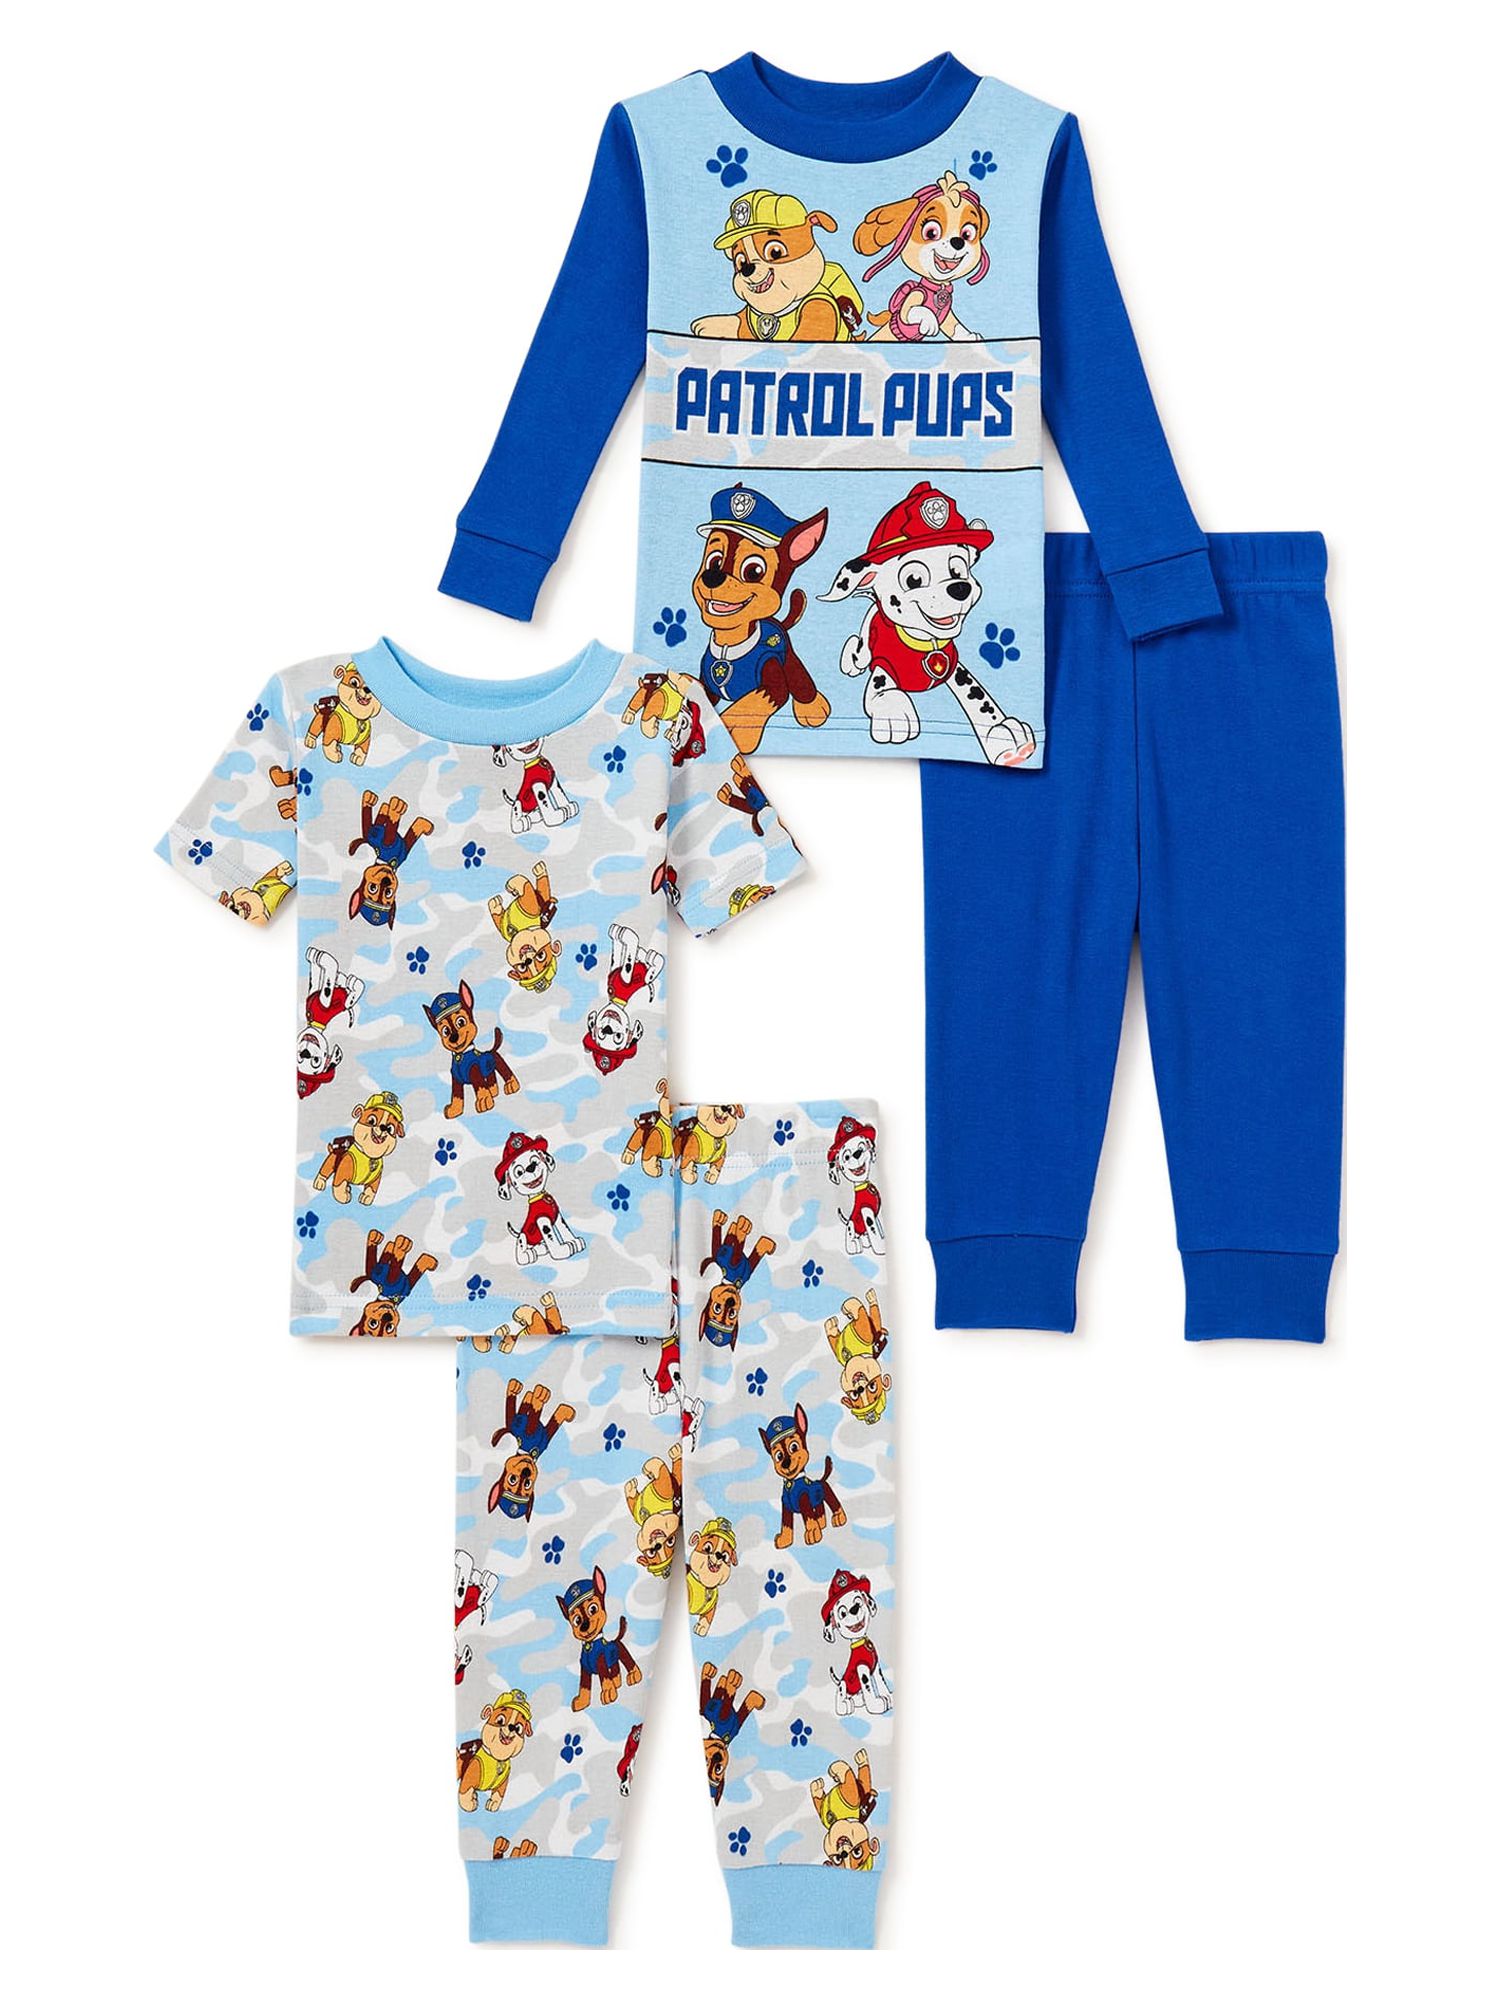 Toddler Character Pajama Set, 4-Piece, Sizes 12M-5T - image 1 of 3